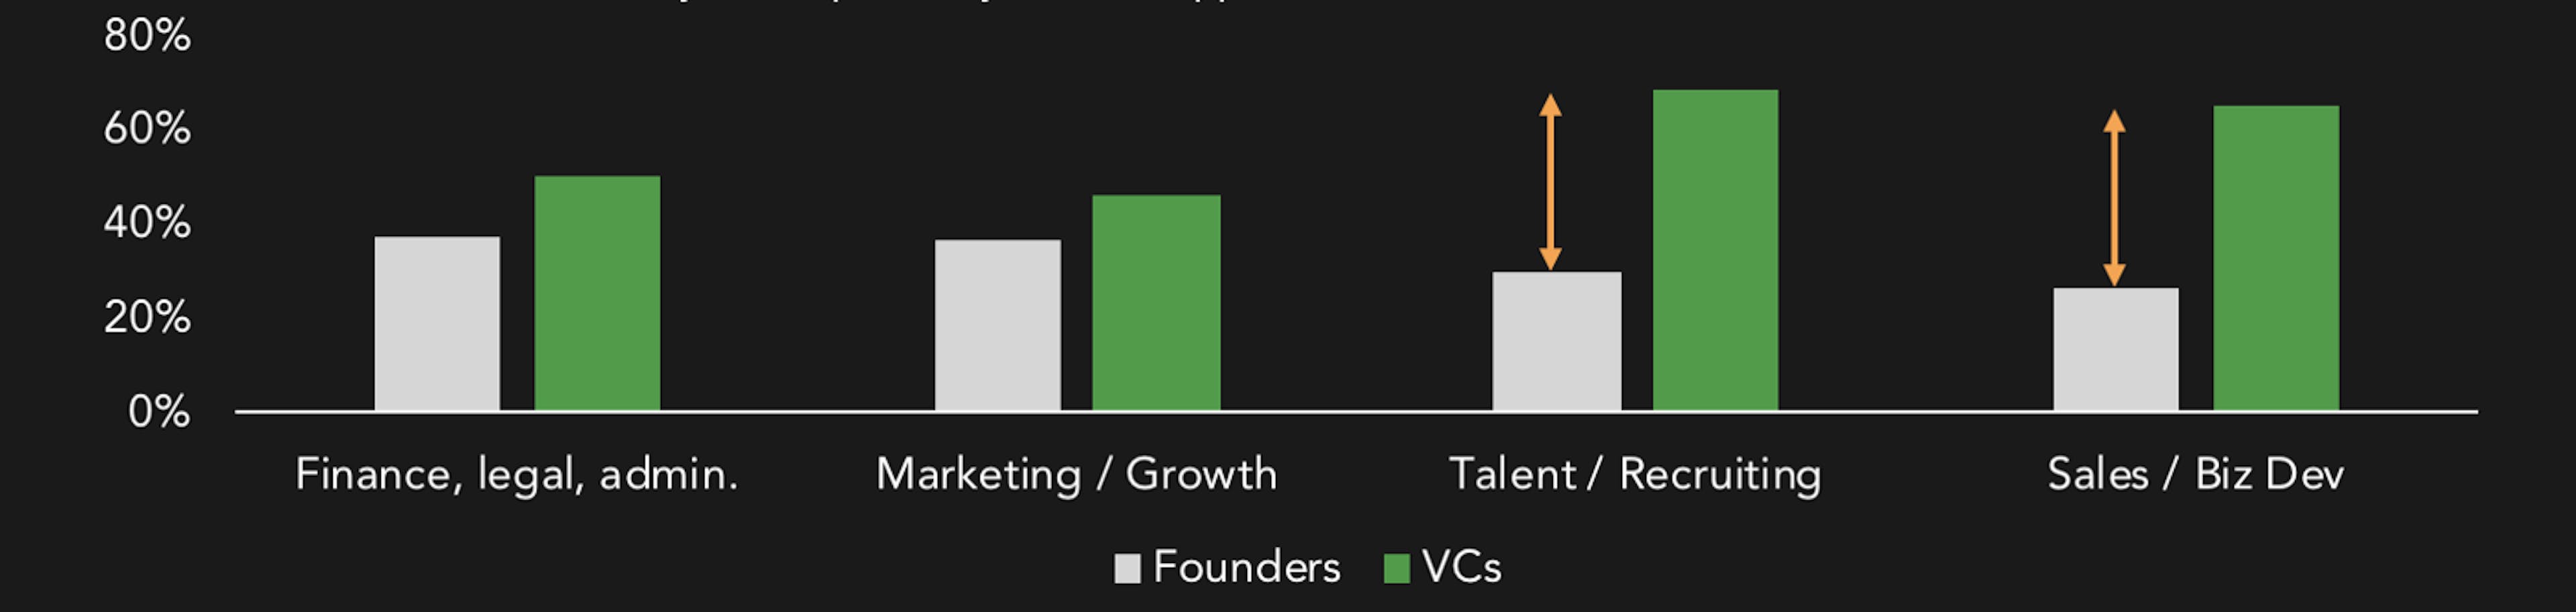 Perspectives of founders vs VCs and the operational support received.